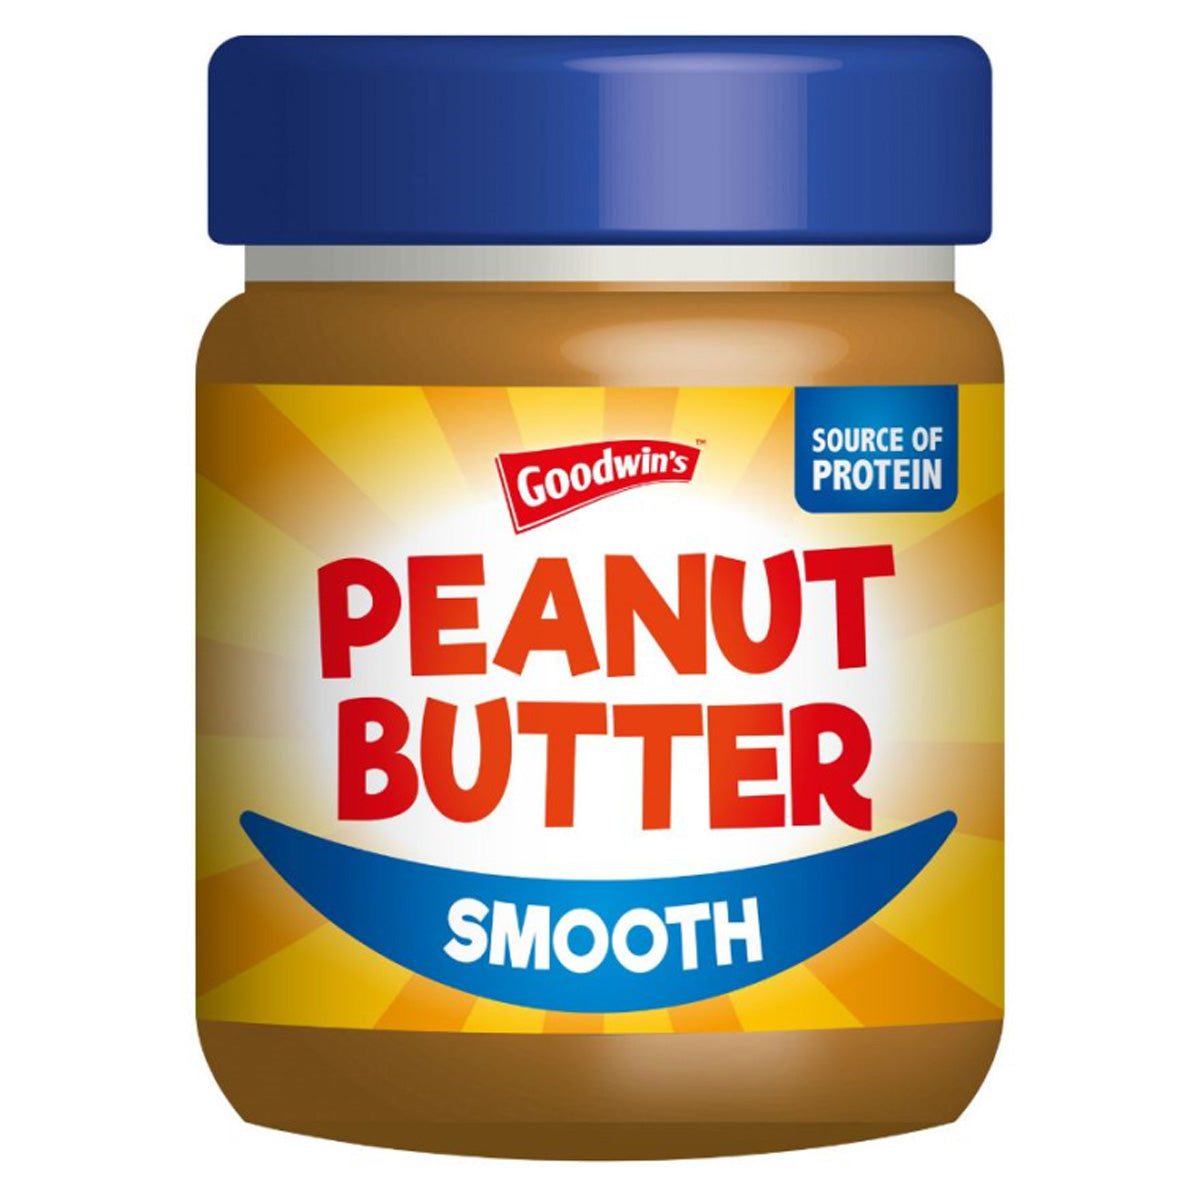 A Goodwins - Smooth Peanut Butter - 340g jar on a white background.